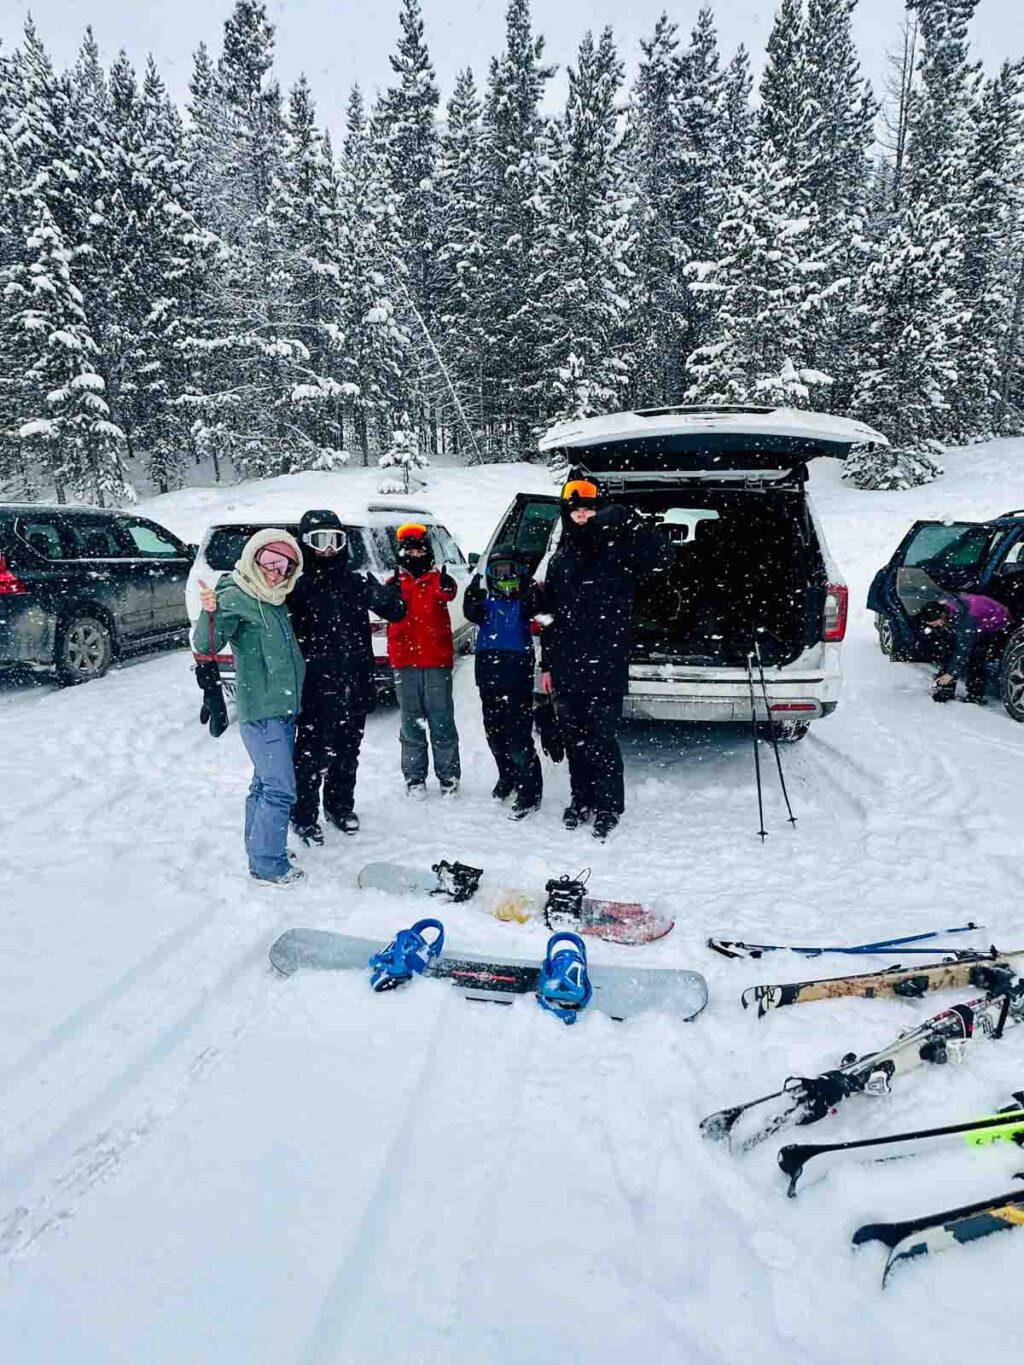 family getting ready to ski posing by car.